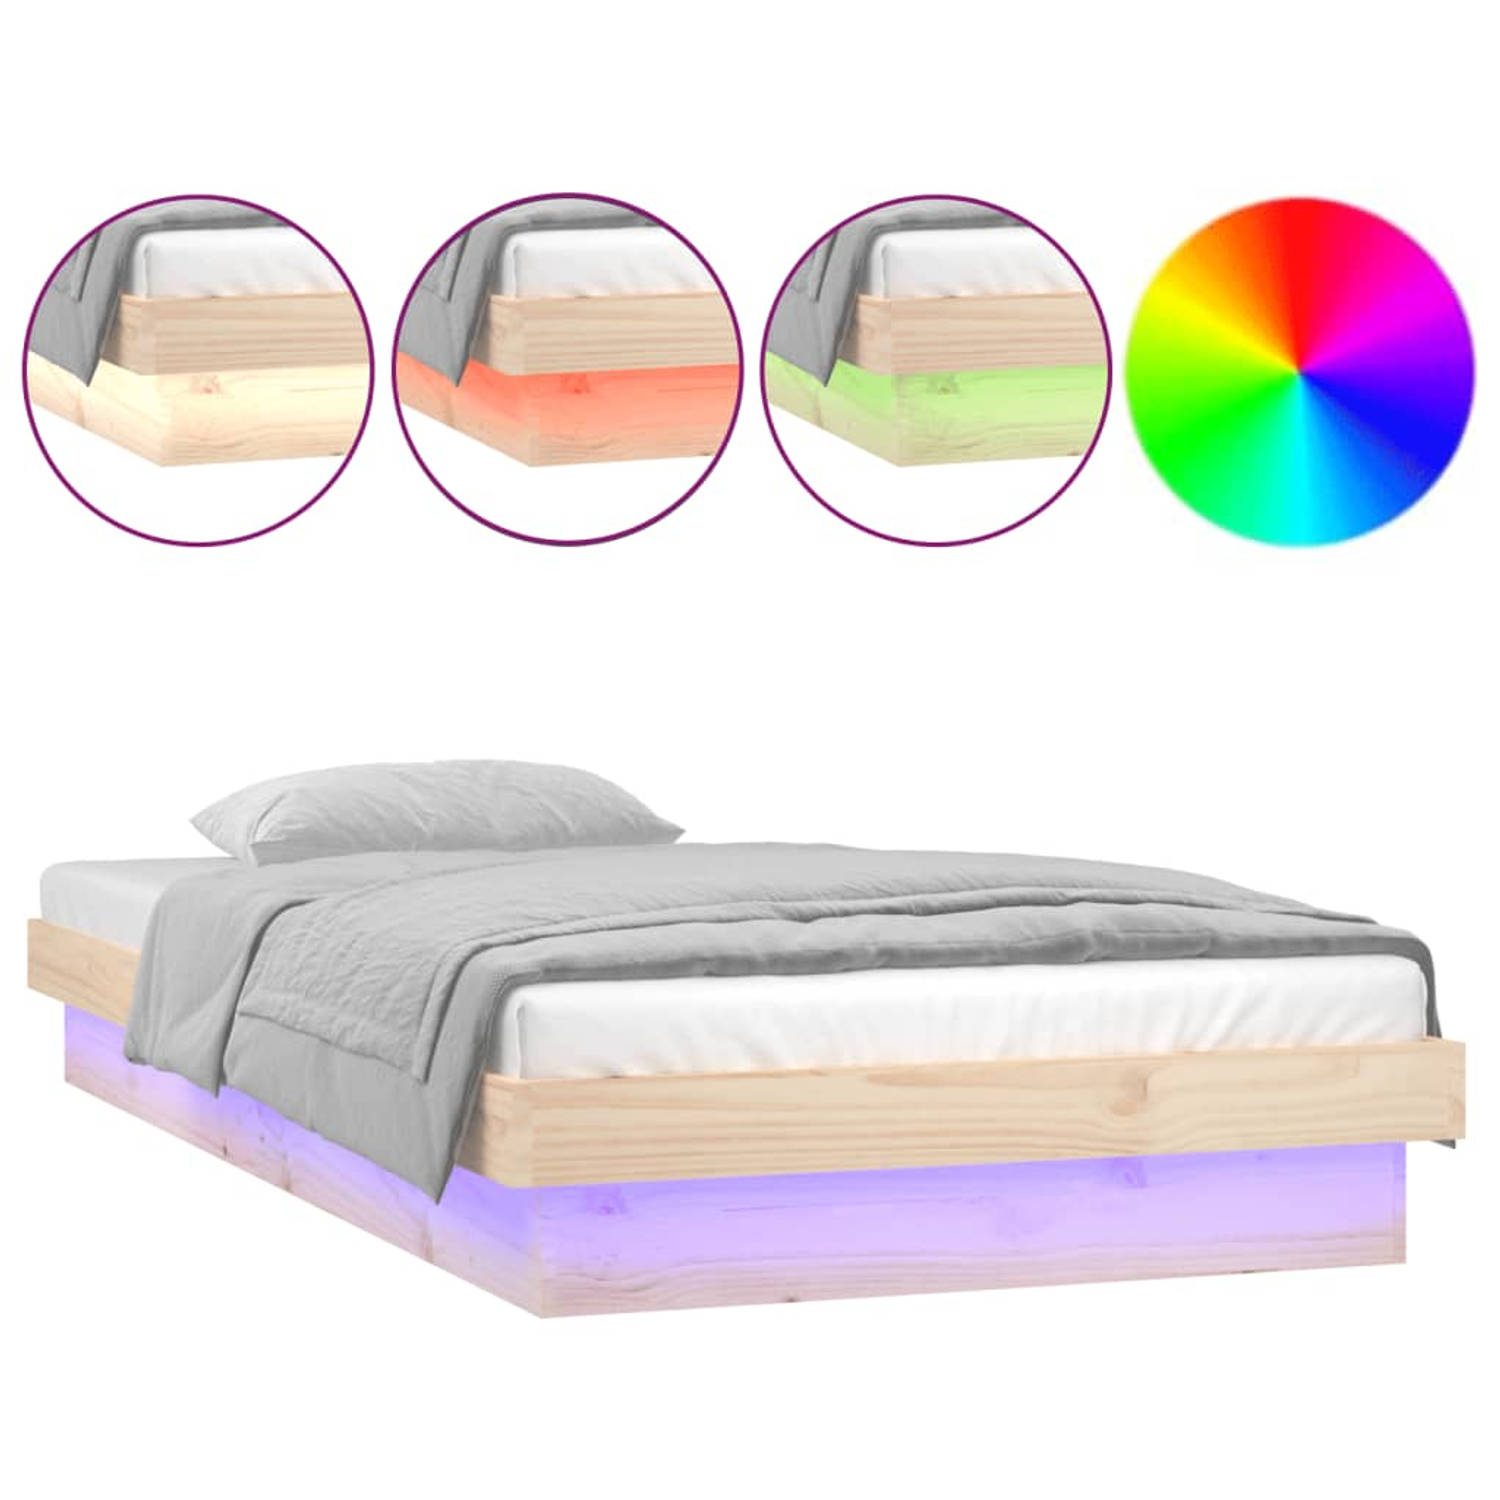 The Living Store Bedframe LED-verlichting Grenenhout 194 x 78.5 x 21 cm 75 x 190 cm USB